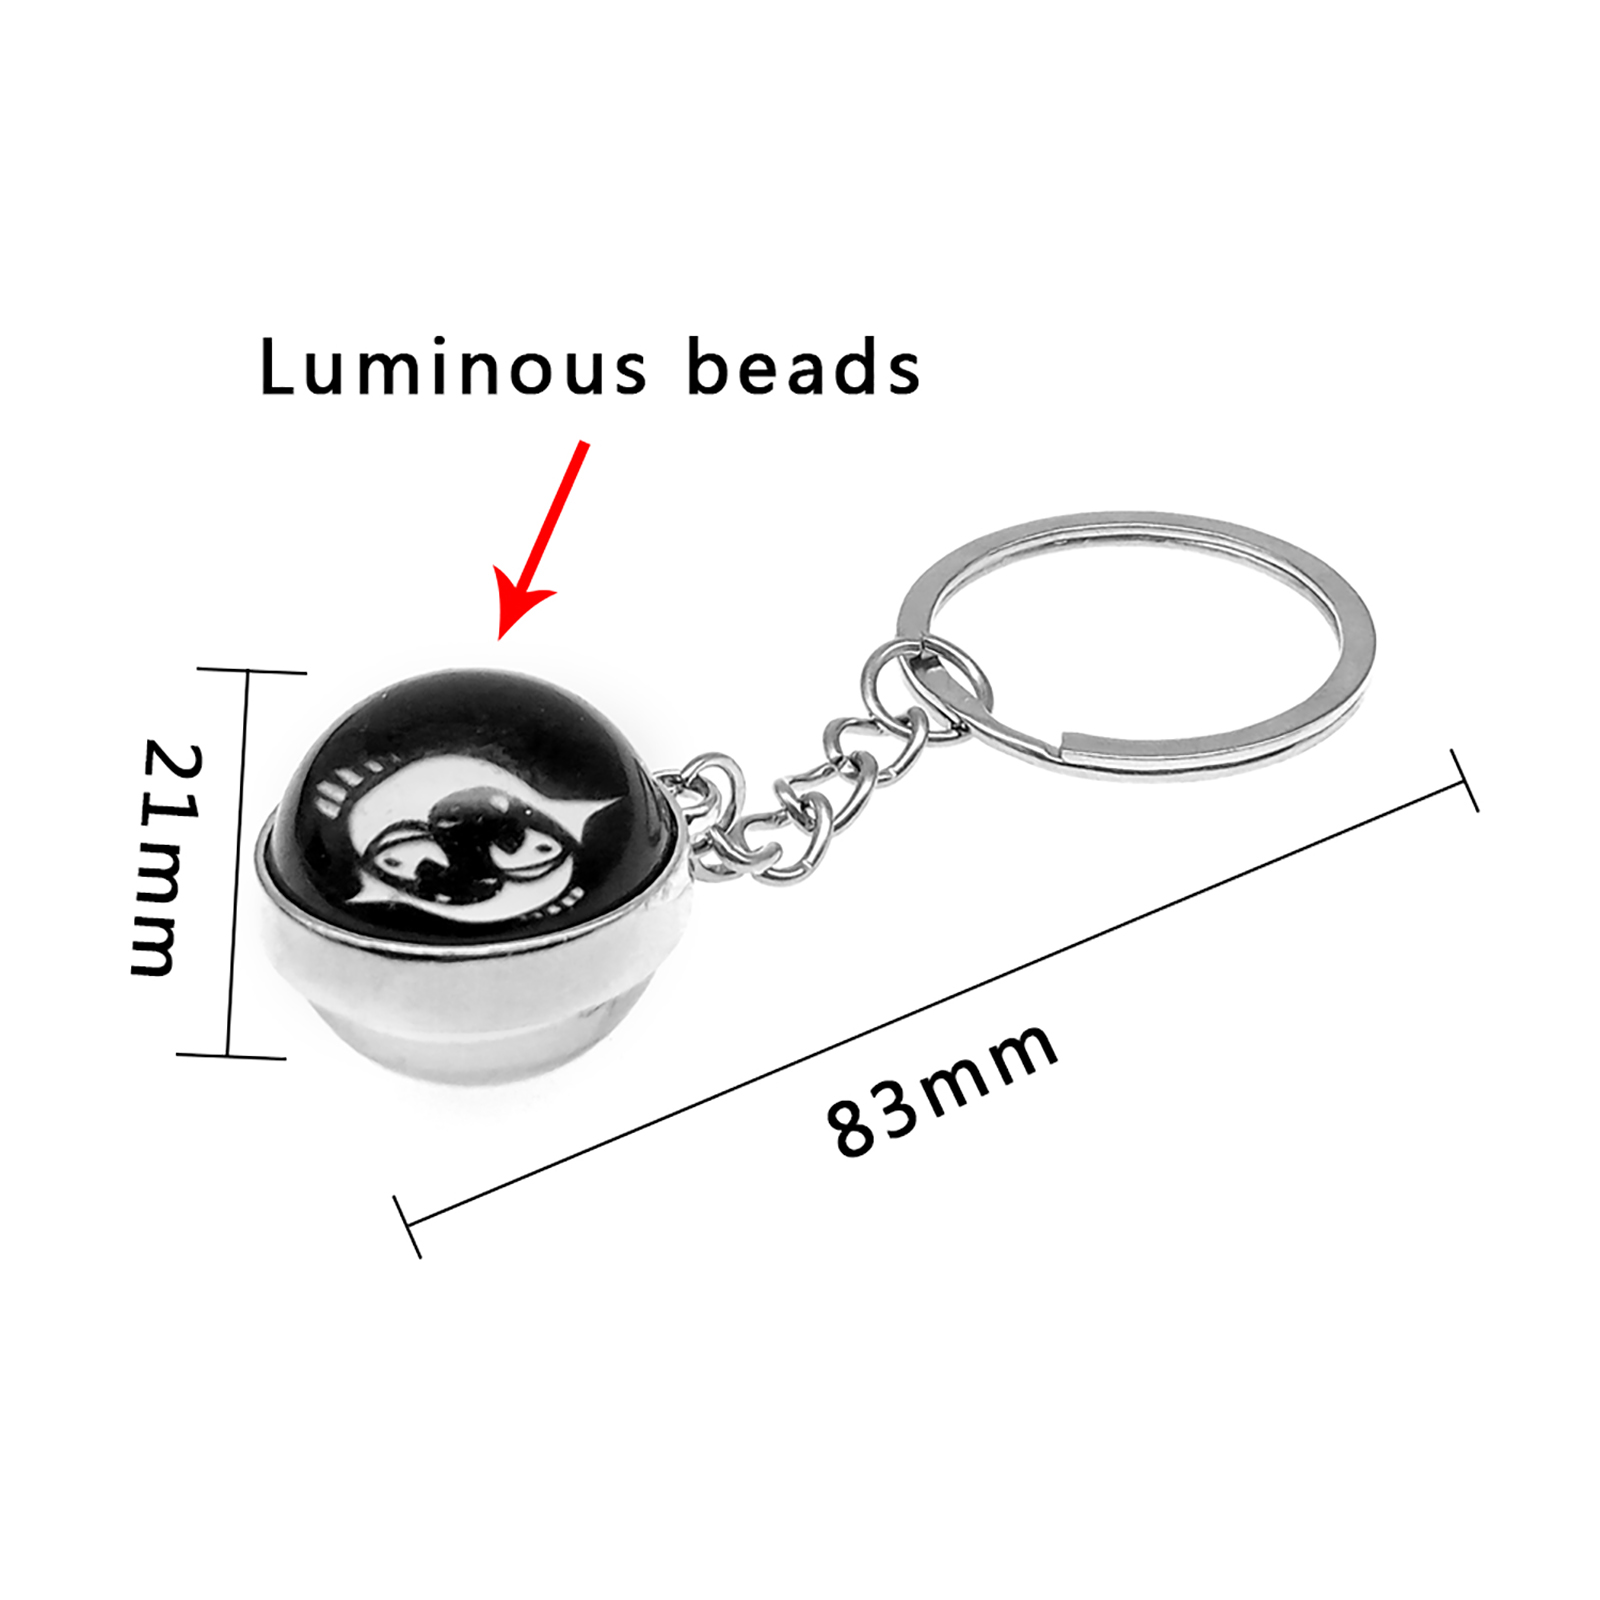 The ball is about 20mm, and the keychain is about 80mm long